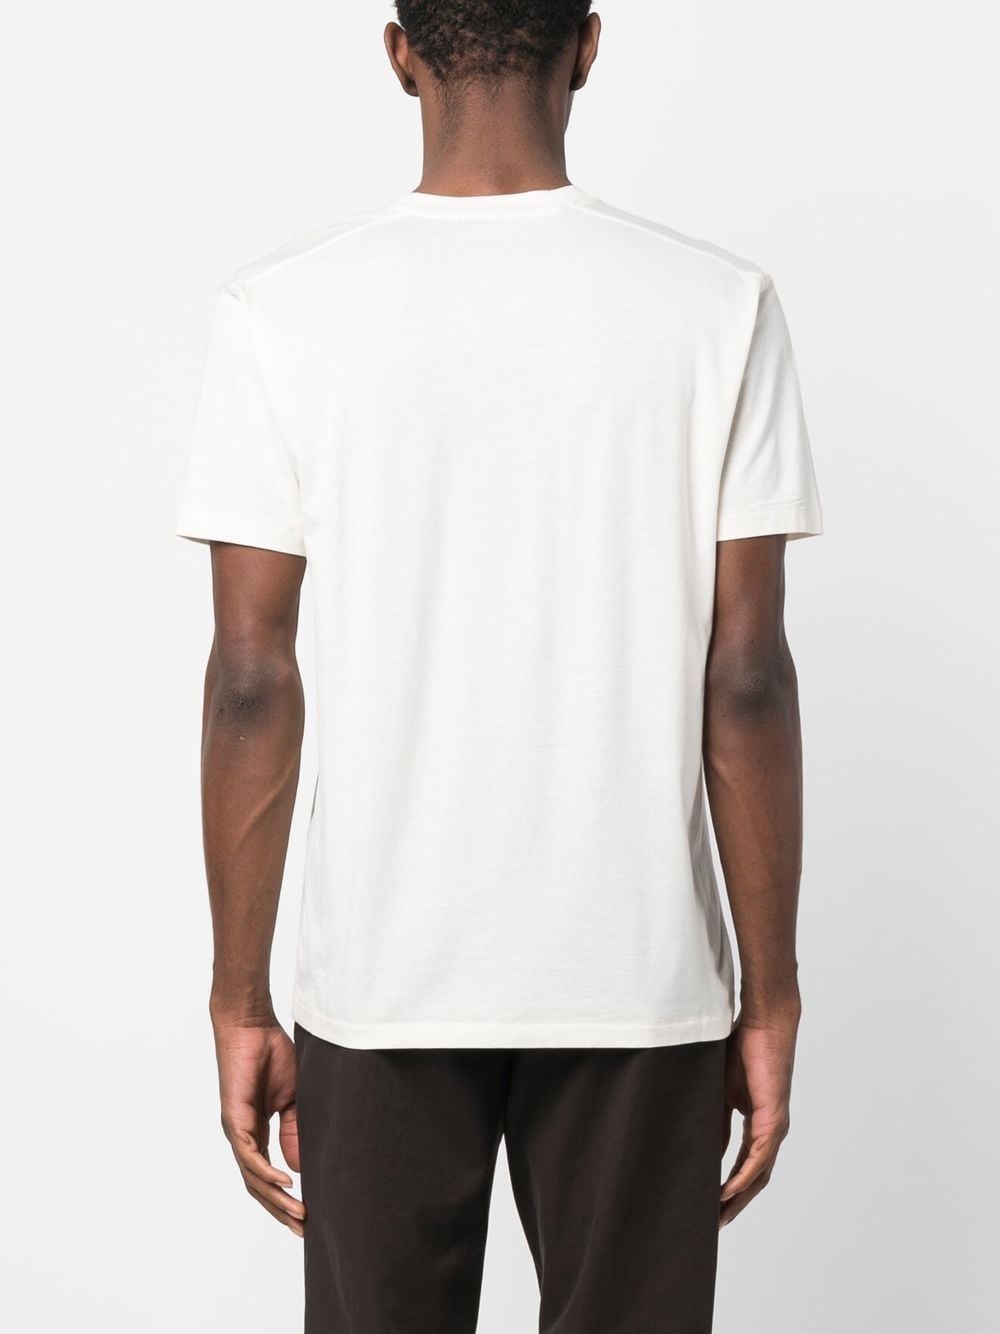 Tom Ford T-shirts and Polos Beige